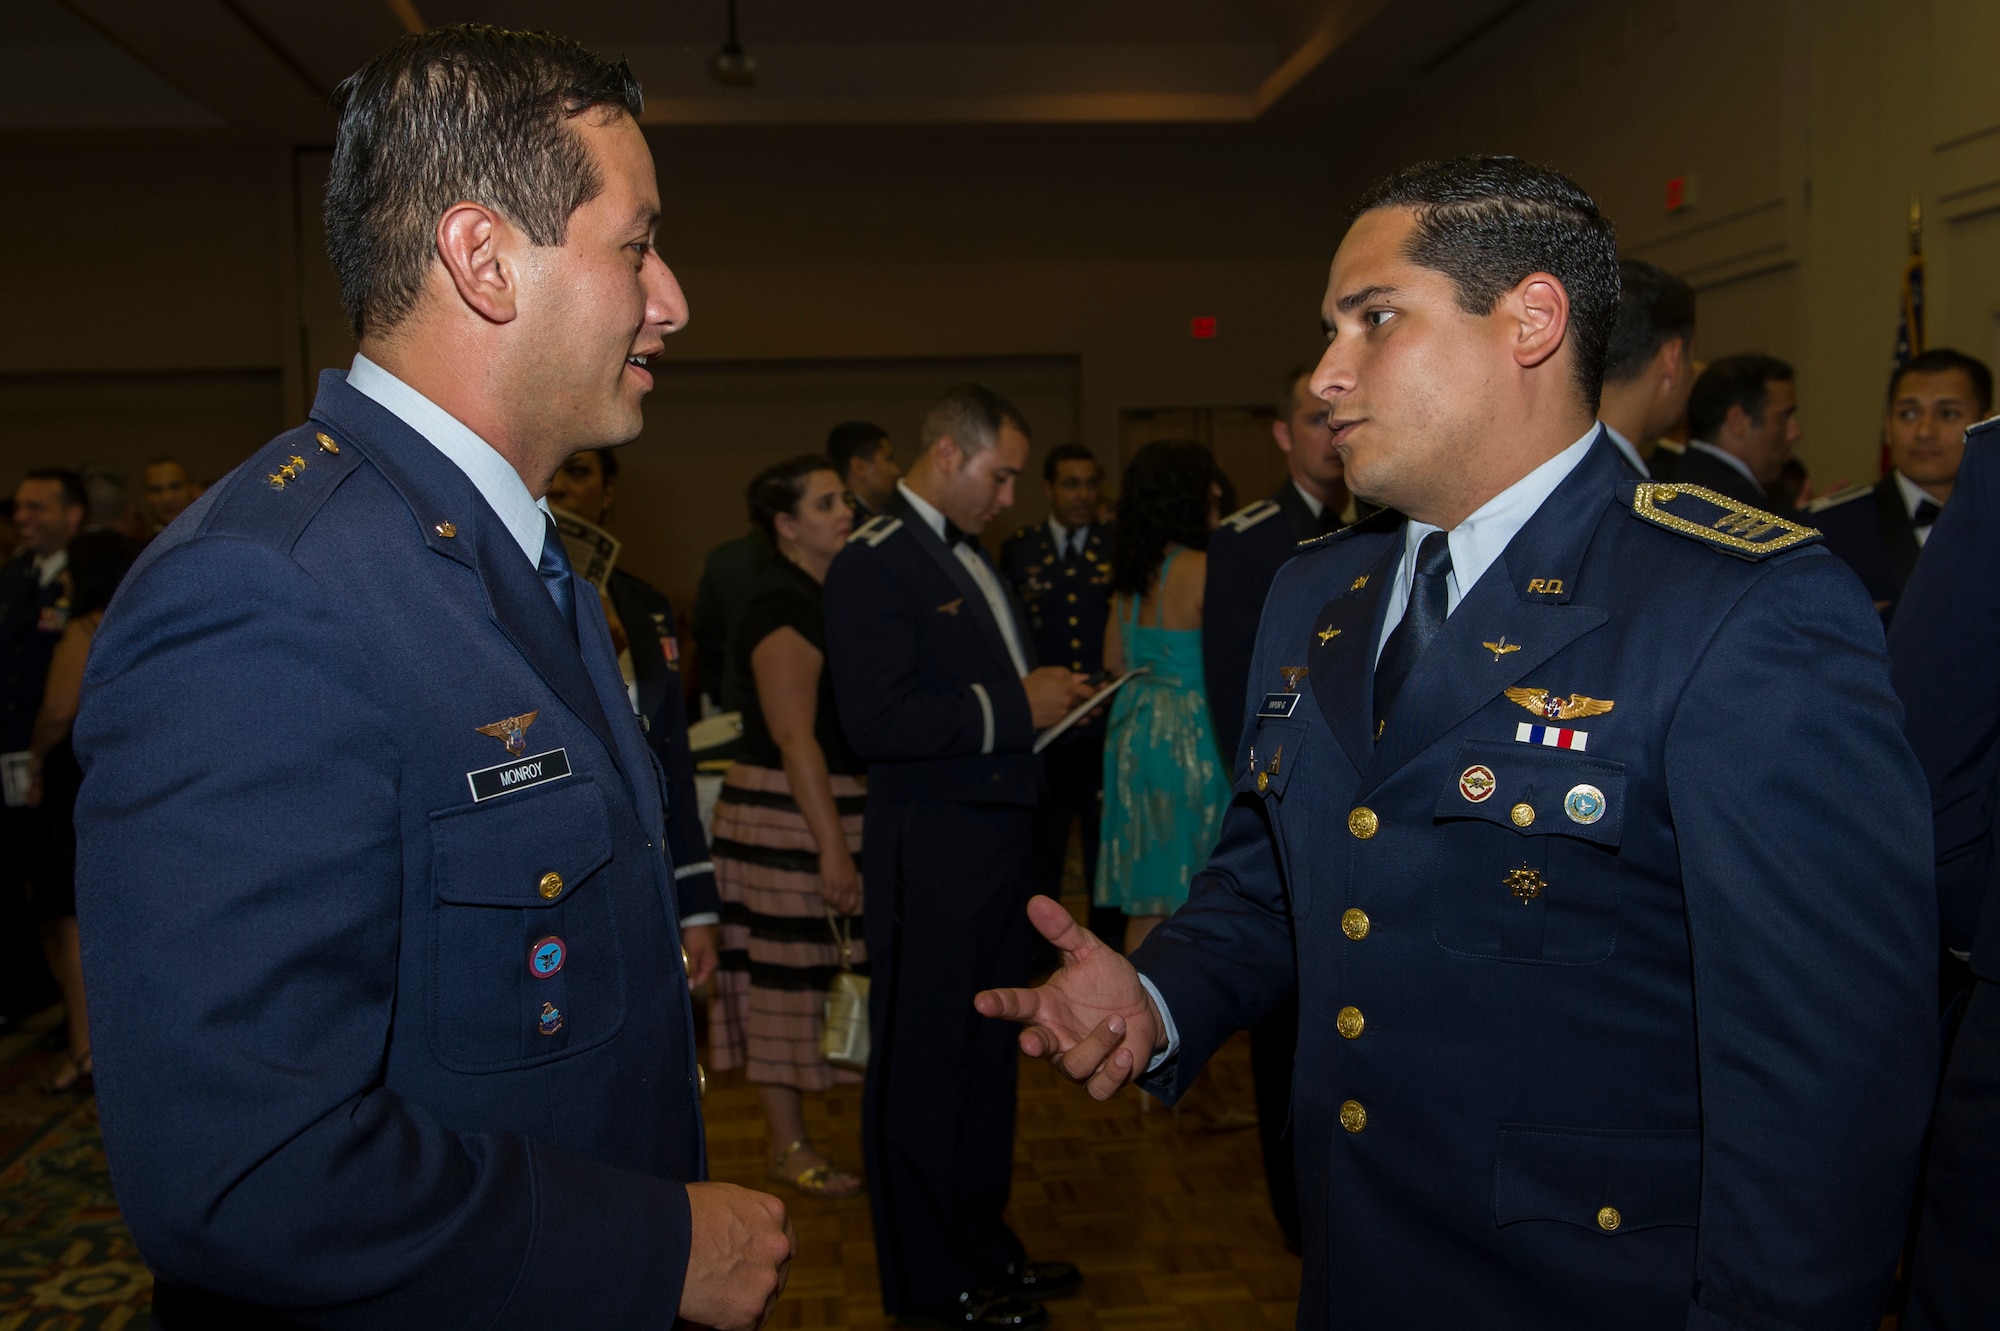 Capt. Carlos Monroy (left), Colombia air force internal control offi cer, talks with Capt. Daniel Yapor, Dominican Republic air force pilot, after the Inter-American Air Forces Academy graduation banquet July 31. Monroy and Yapor met through the IAAFA  International Squadron Officers School Professional Military Education class at Joint Base San Antonio-Lackland.